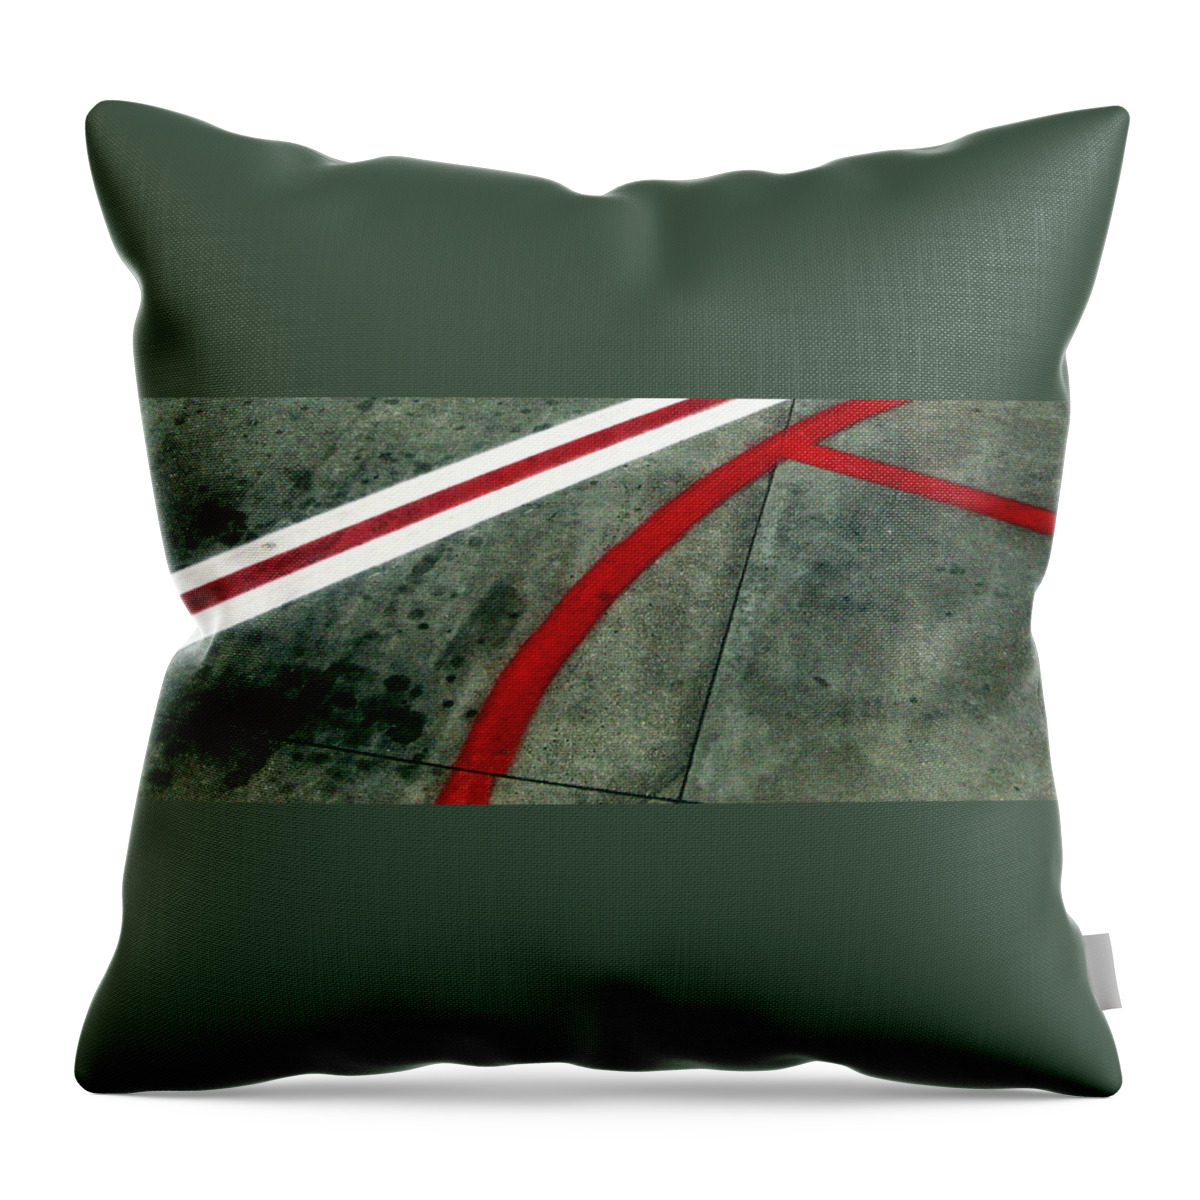 Line Throw Pillow featuring the photograph Sky Line 4 by JC Armbruster